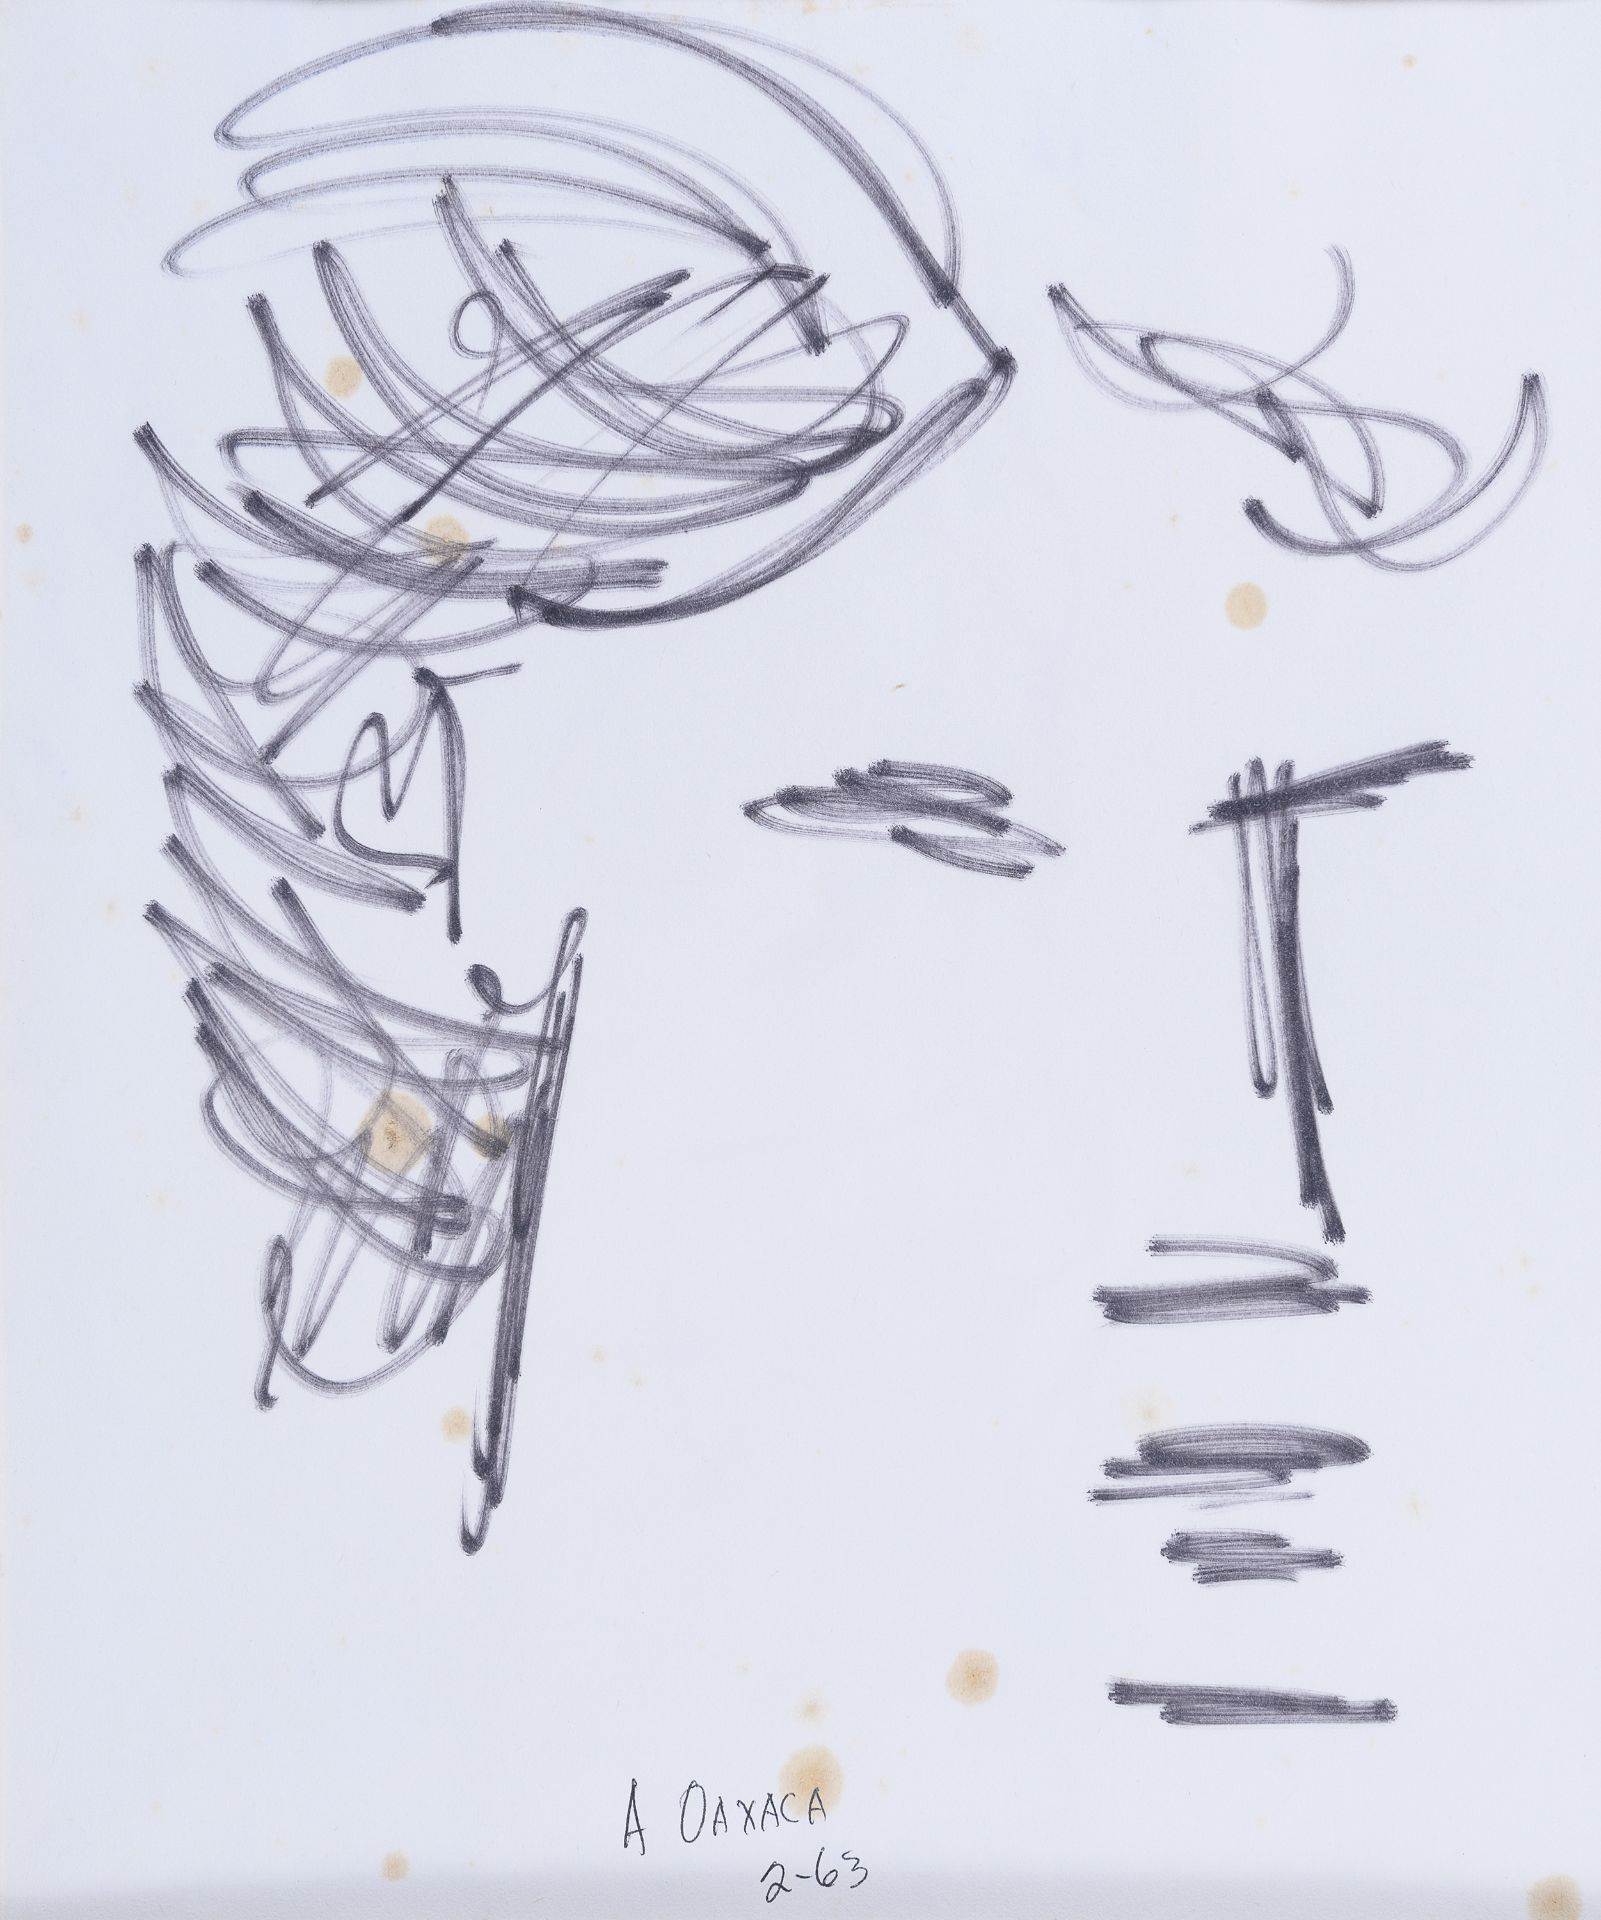 FELT PEN DRAWING OF A MAN'S FACE BY ANTHONY QUINN 1963